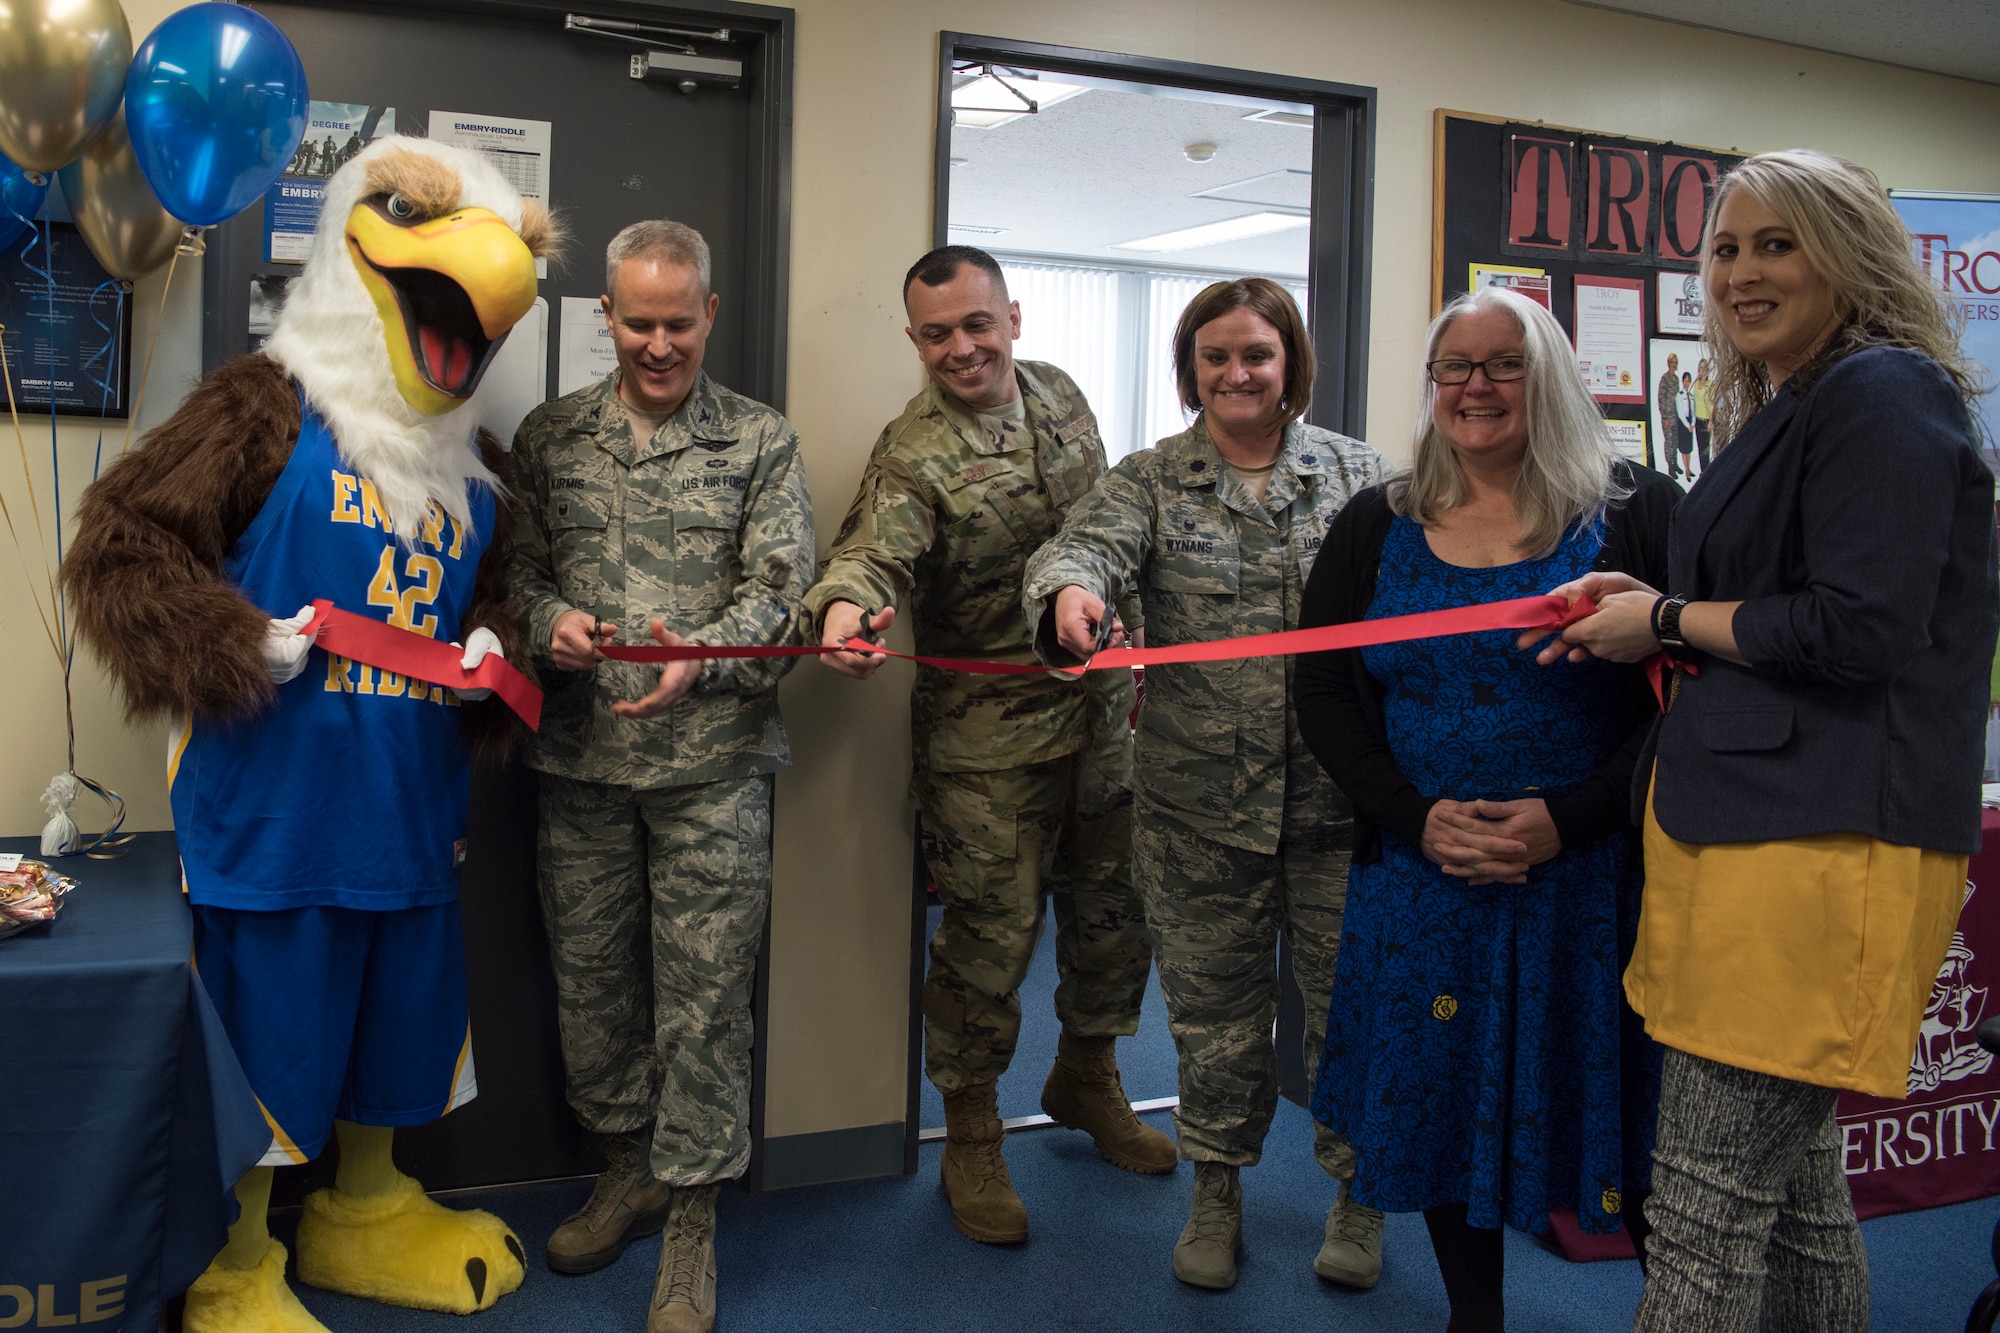 Embry-Riddle Aeronautical University grand re-opening attendees cut a ribbon to welcome the new university at Misawa Air Base, Japan, March 13, 2019. A temporary ERAU opened at MAB in 2017 measuring the interest of Team Misawa members. The Misawa education office opened a permanent school house after receiving an exceptional community response to the program. (U.S. Air Force photo by Airman 1st Class Collette Brooks)